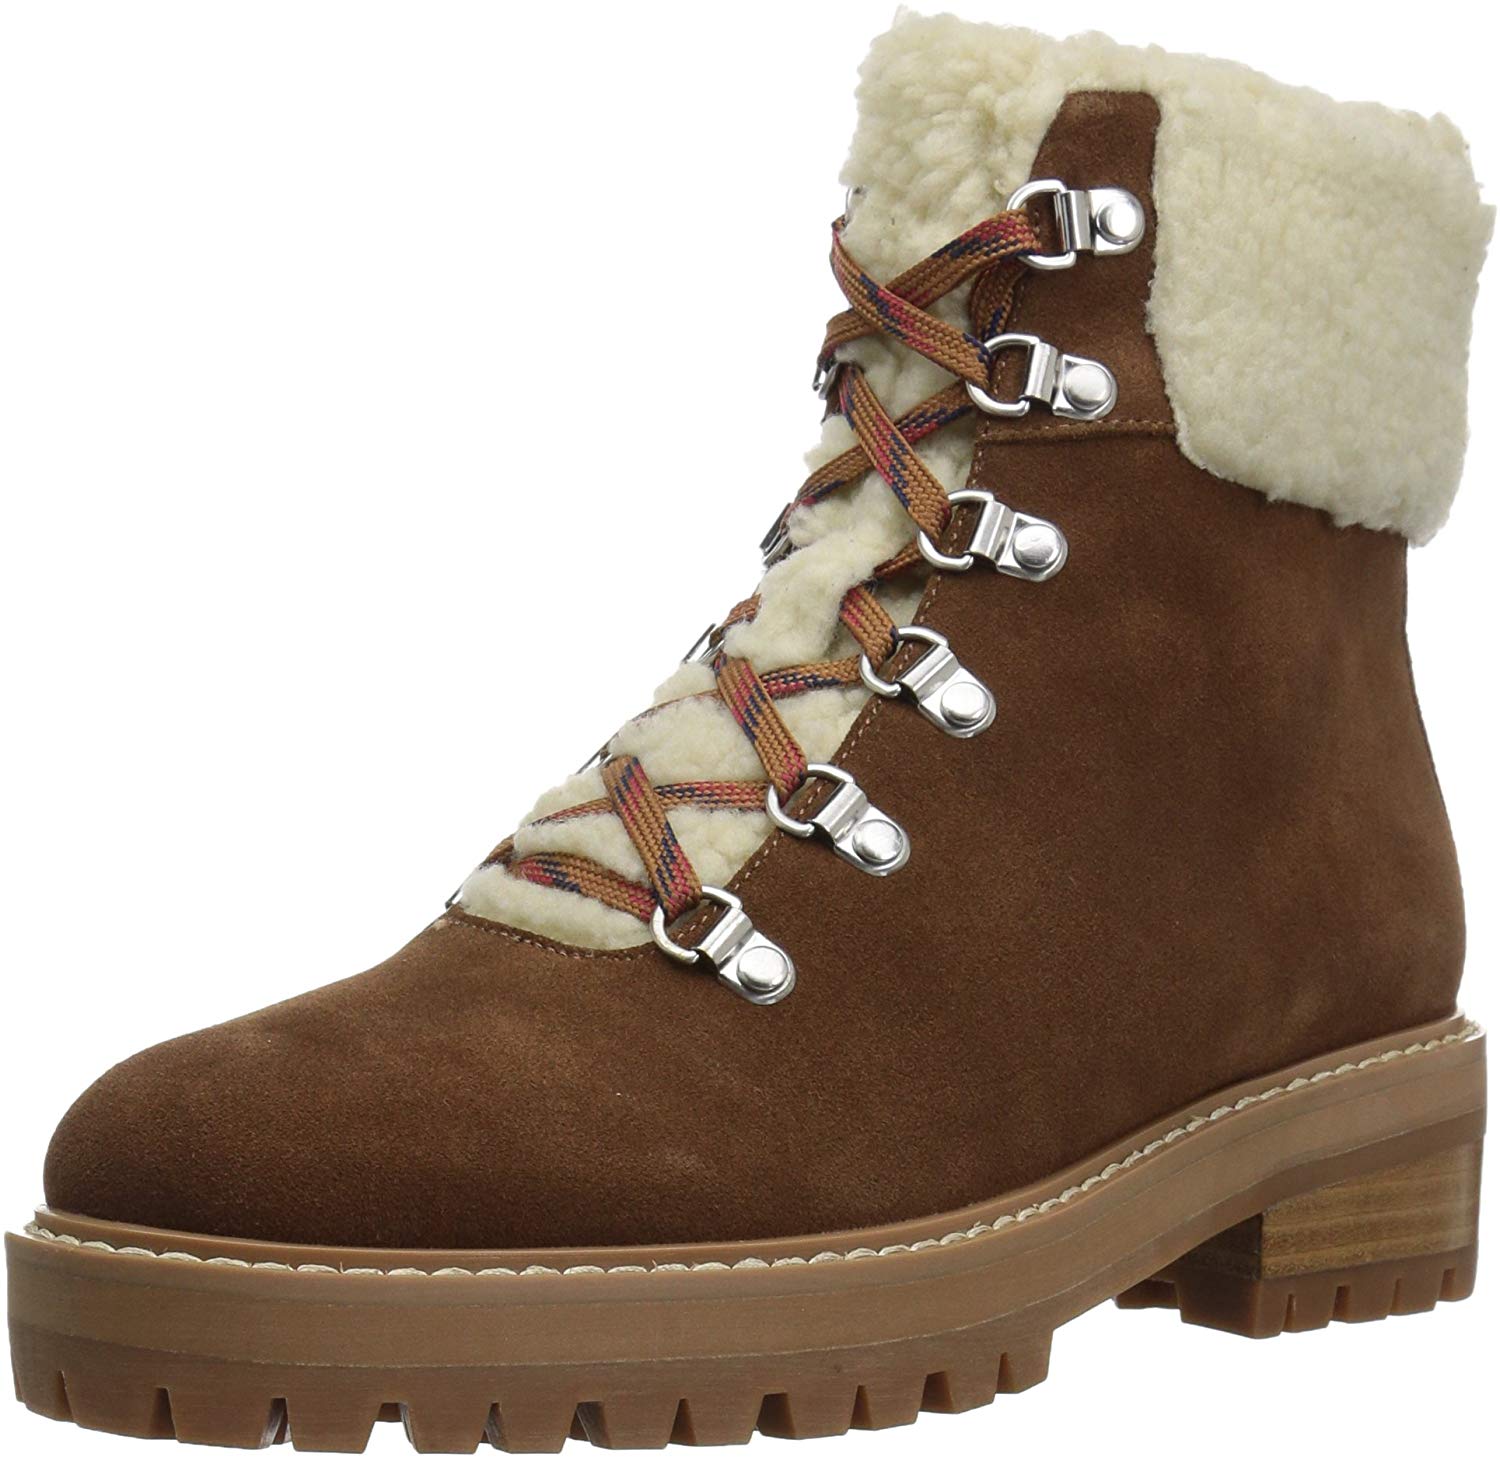 The Fix + Hiker Boot with Faux Shearling Trim